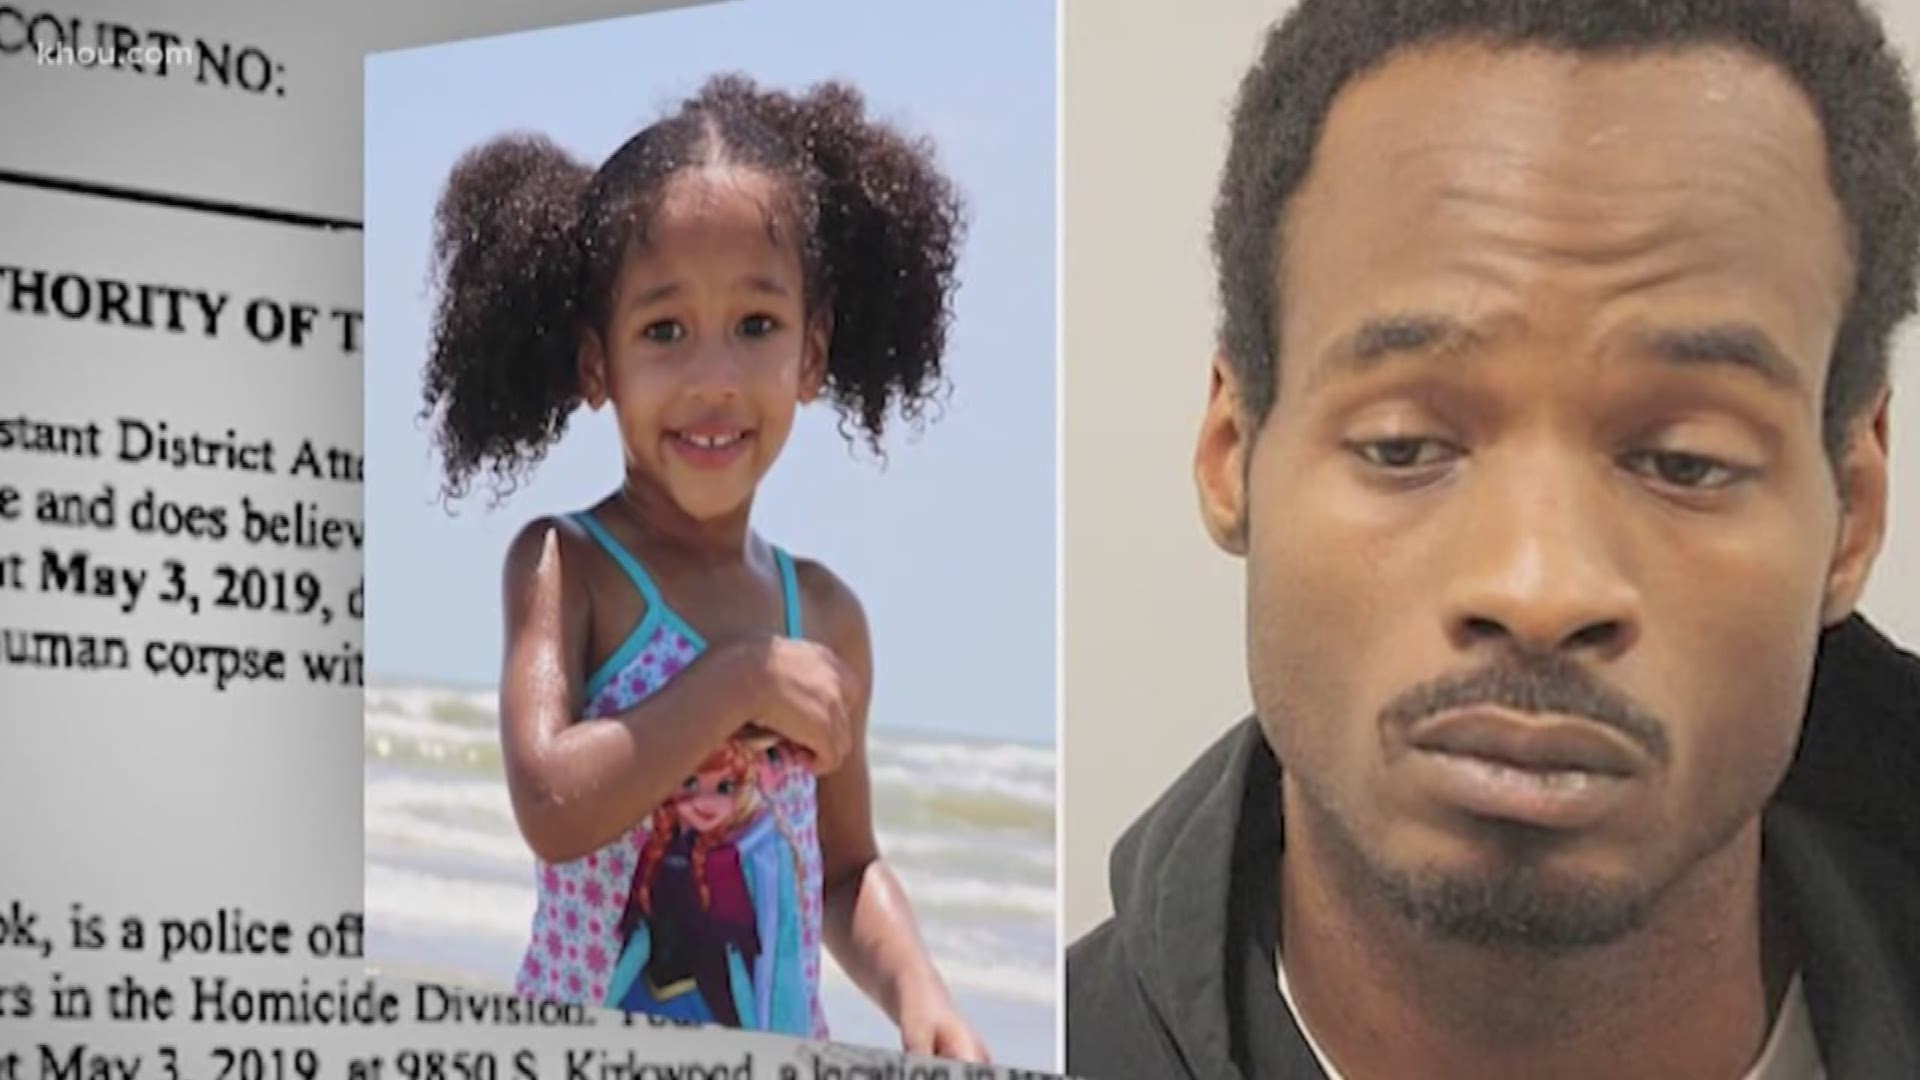 Court records show Derion Vence’s bond was reduced from 1 million dollars to 45,000 as of Monday afternoon. Vence has been charged in the disappearance of his 4-year-old stepdaughter, Maleah Davis.